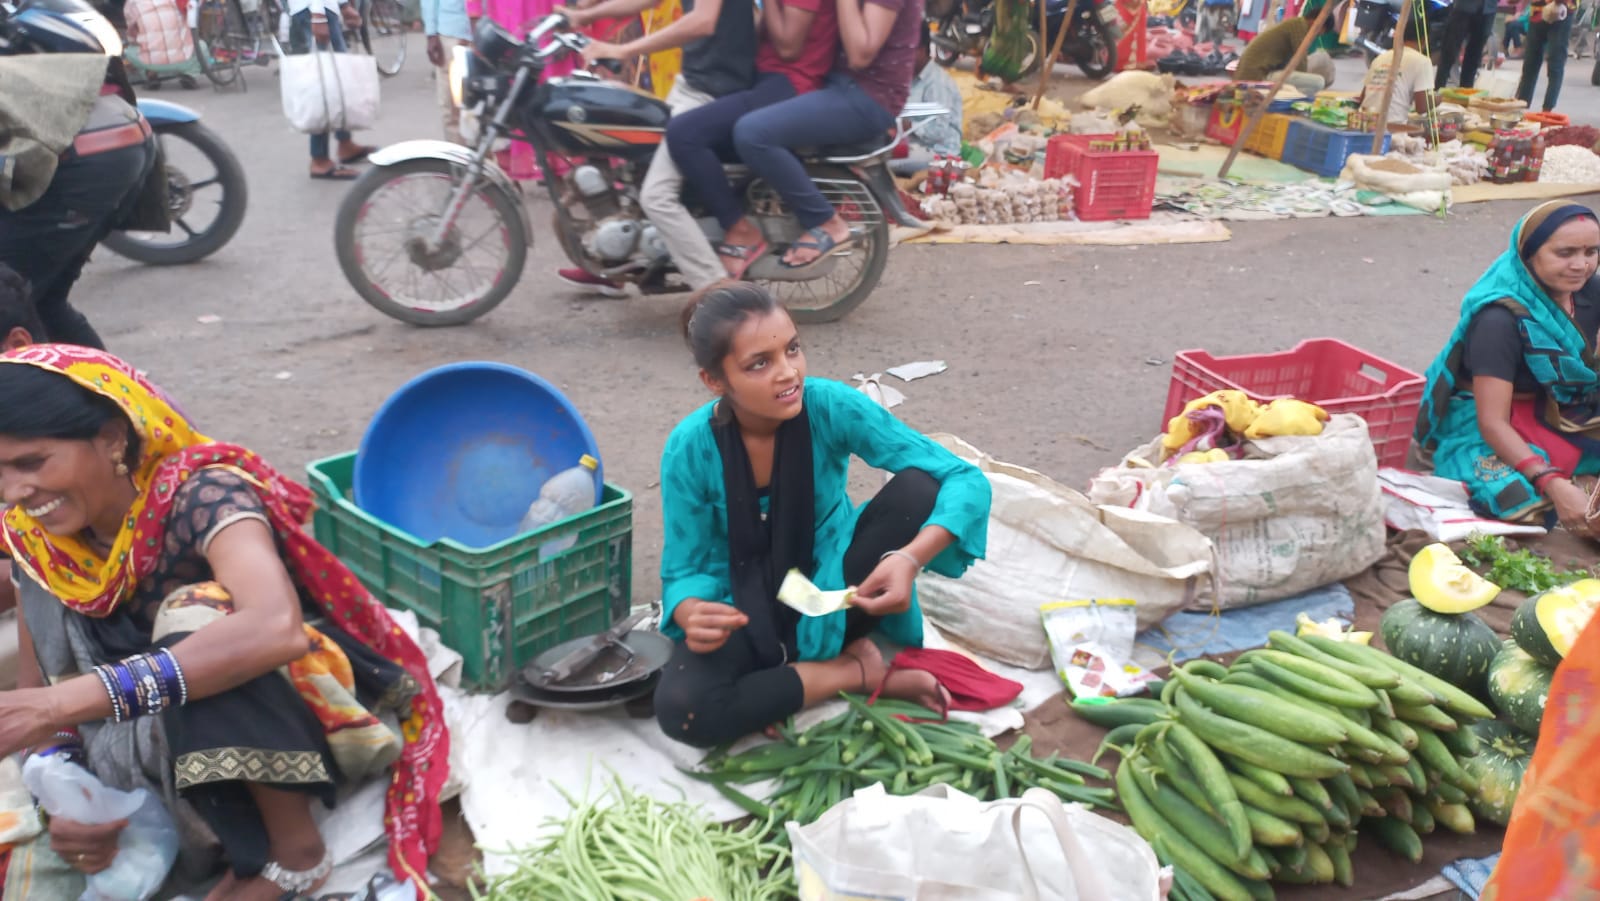 Vegetable market punished wherever I wanted, jammed every day